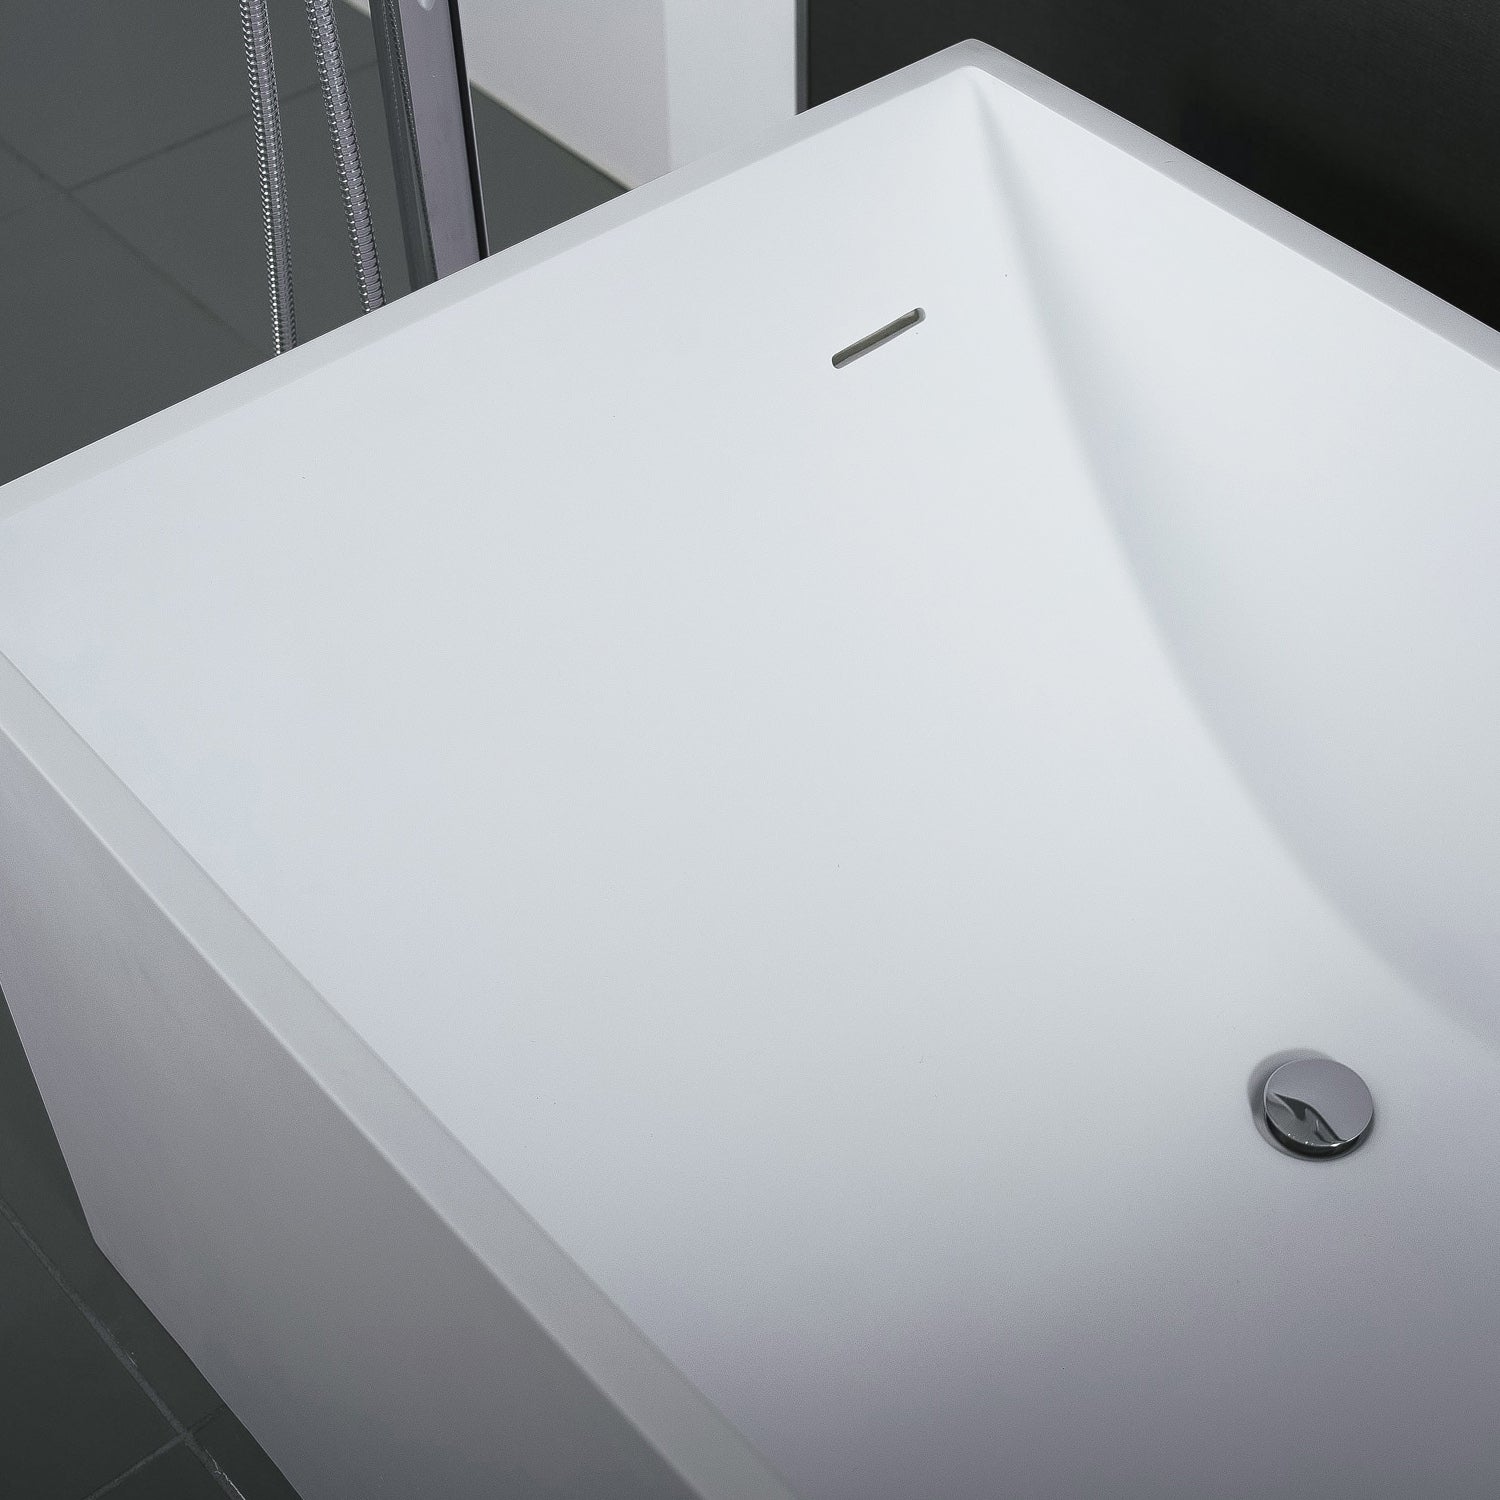 DAX Square Freestanding Solid Surface Bathtub with Central Drain and Overflow, Stainless Steel Frame, 66-1/18 x 21-5/8 x 29-5/8 Inches (BT-AB-B029)